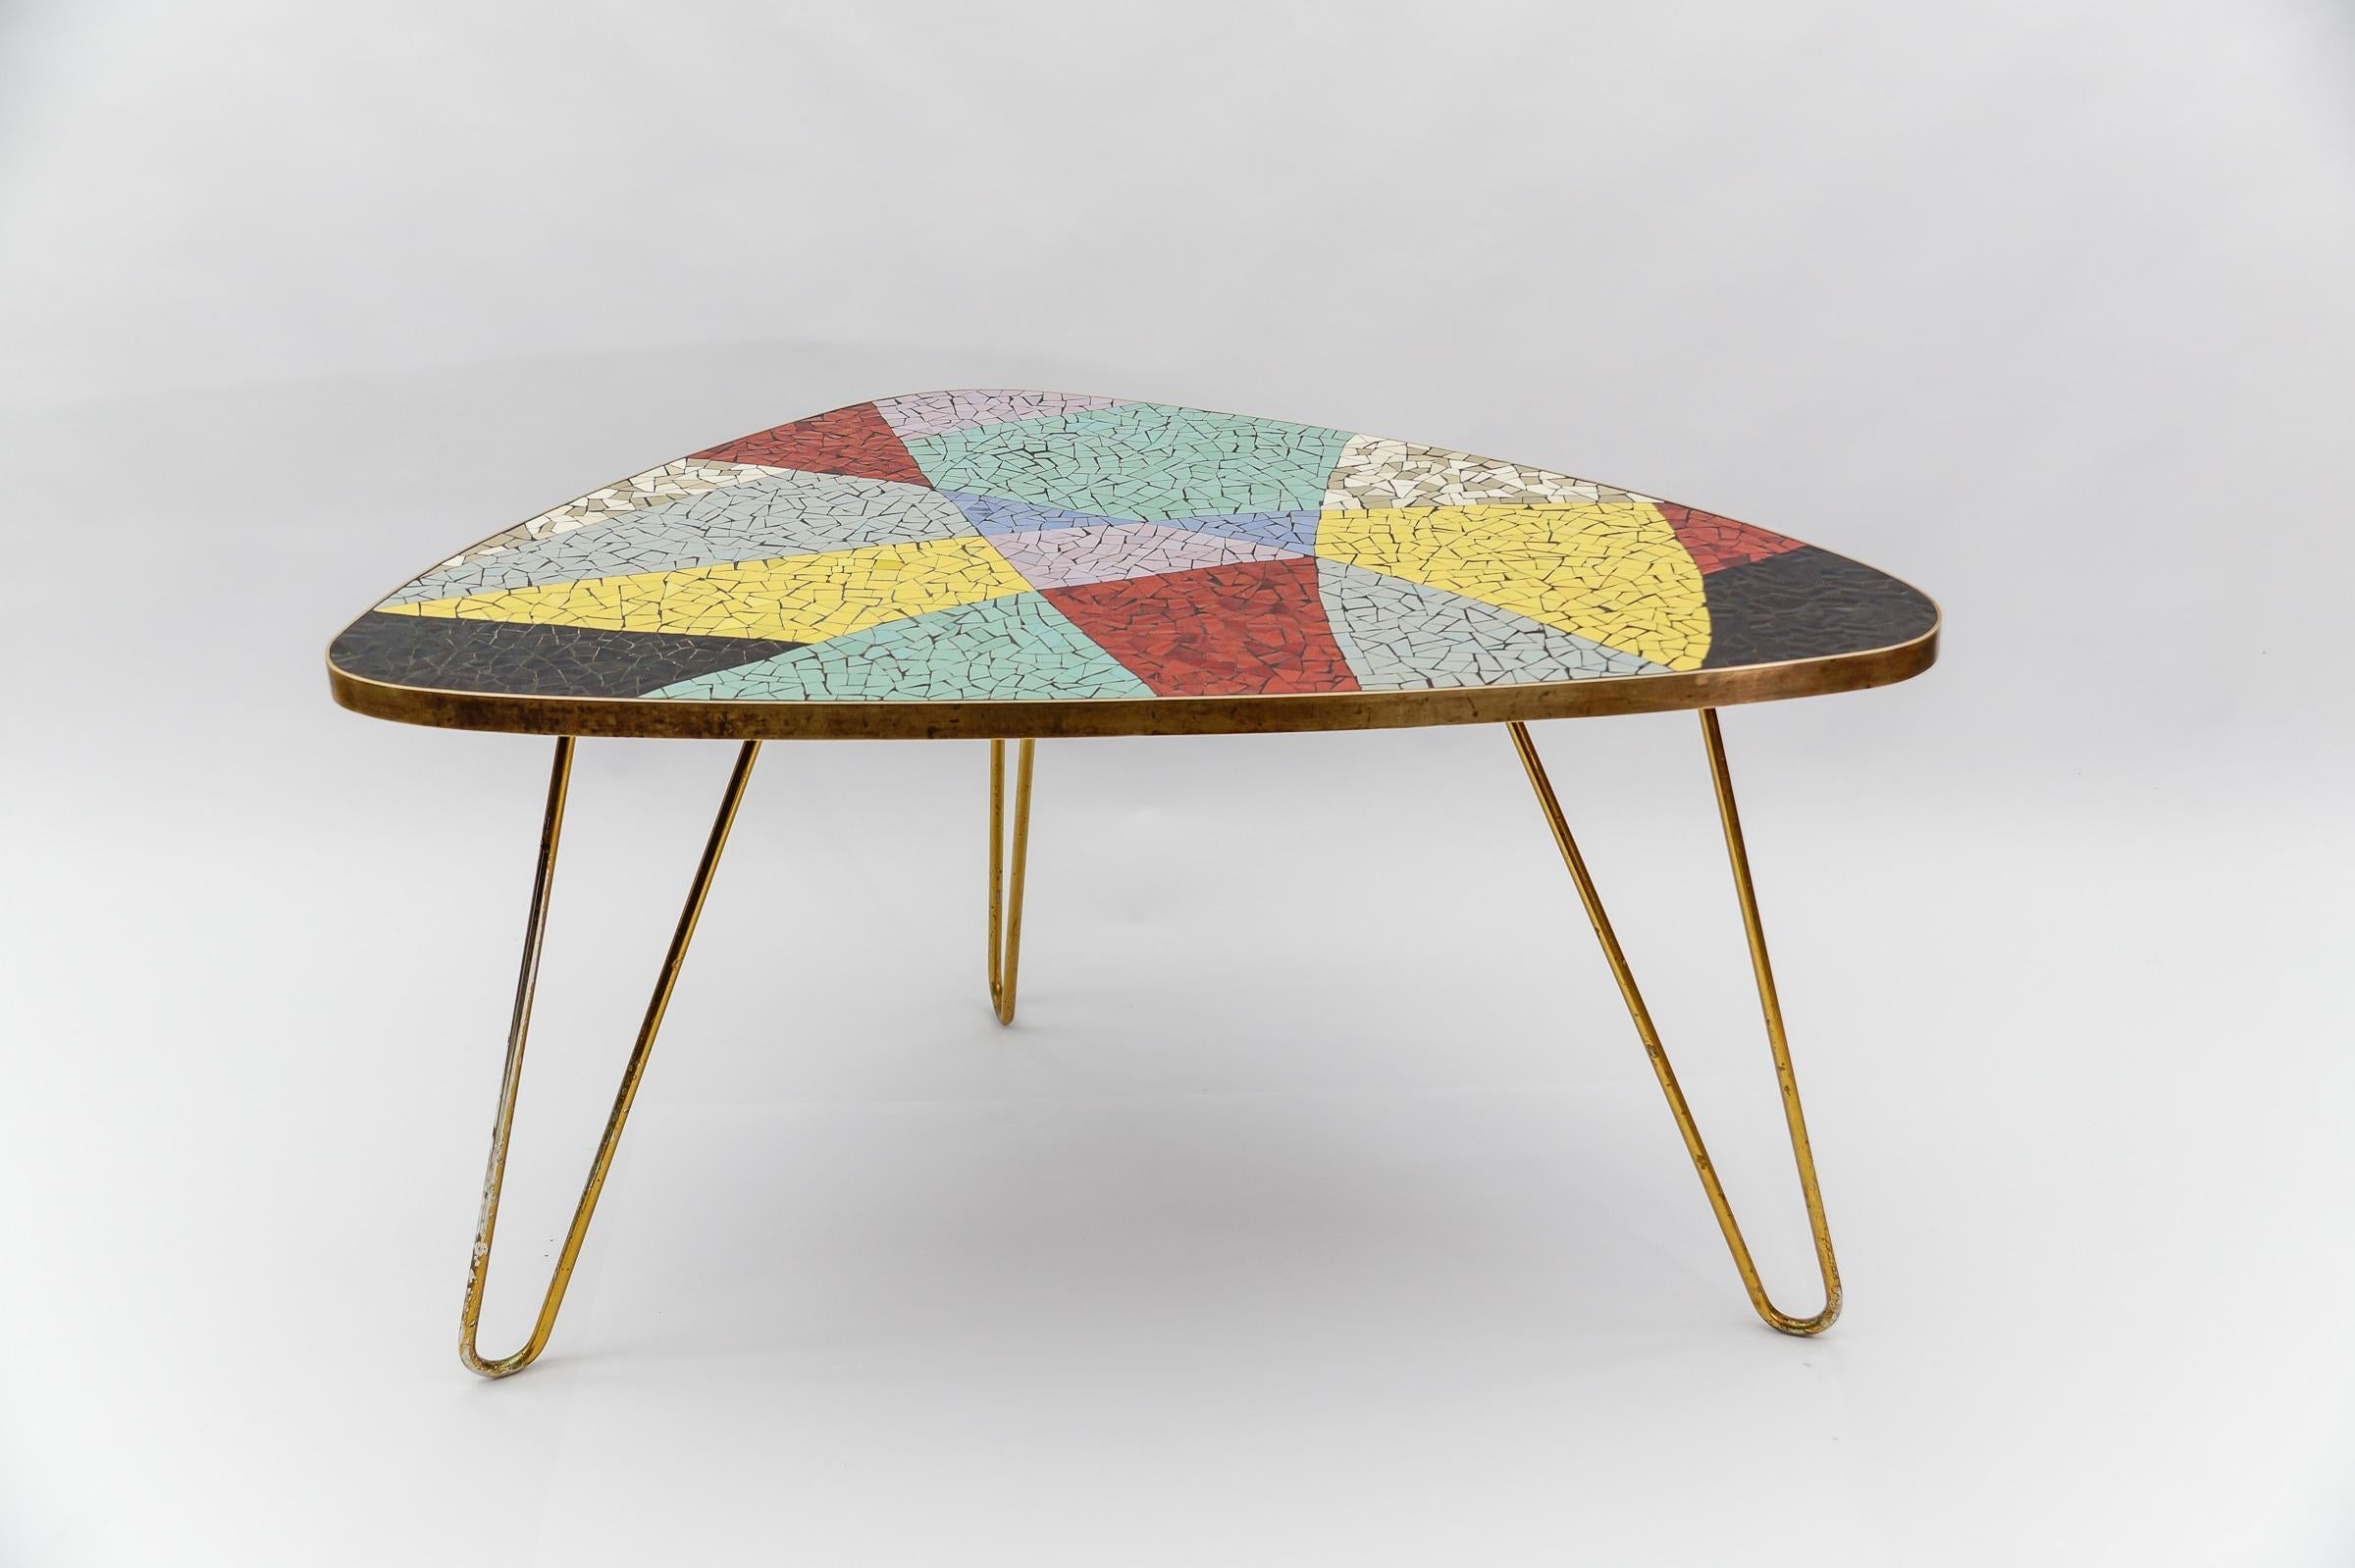 Wonderful color combination. Rarely seen such a harmonious table. The colors are very rich. 

The table is heavy and sturdy. 

The metal legs are painted gold, although some of the paint has come off one leg, but this is not as noticeable as you can